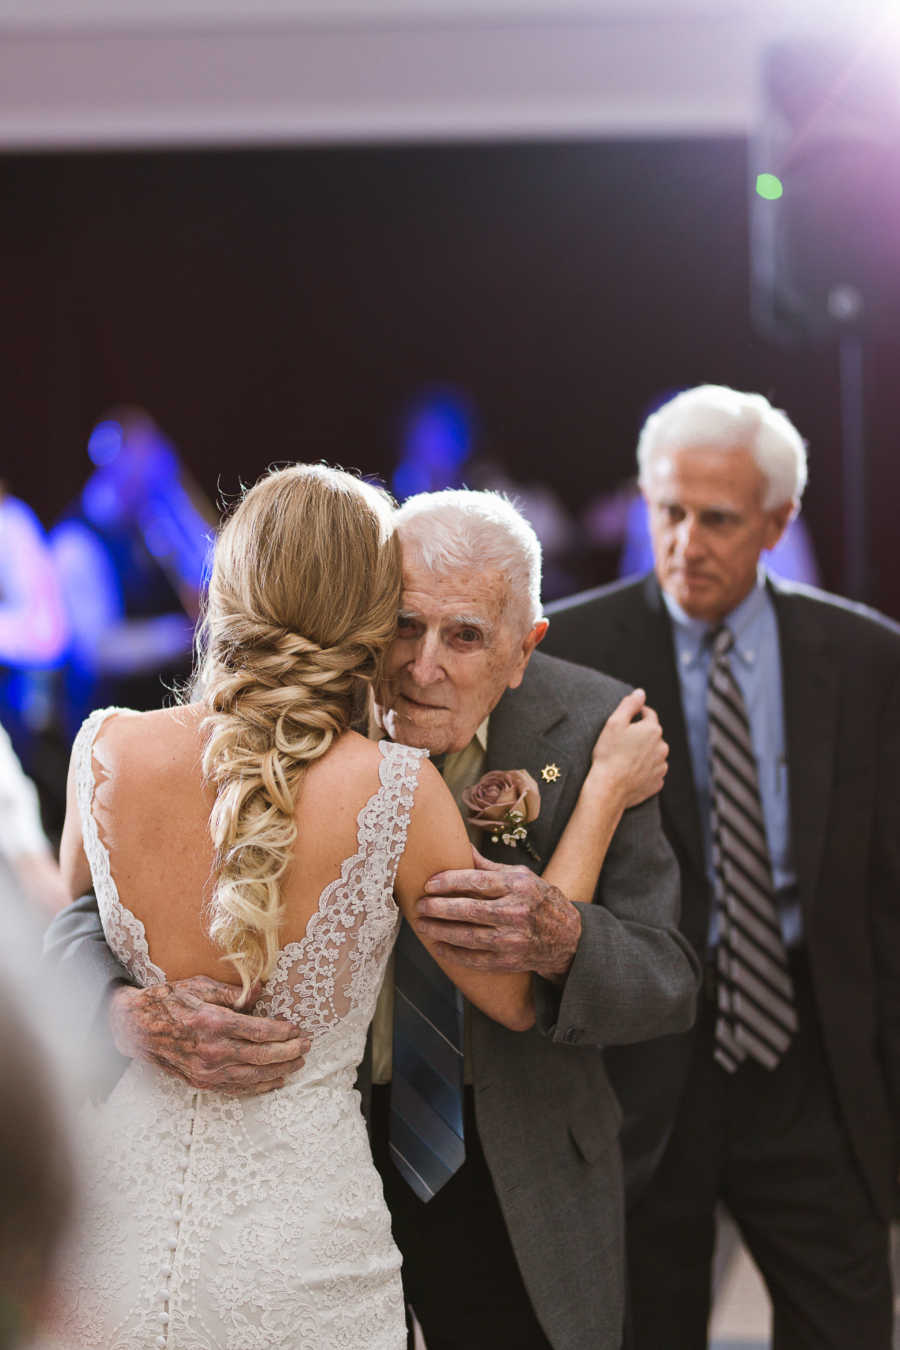 Grandfather hugs granddaughter while dancing at her wedding